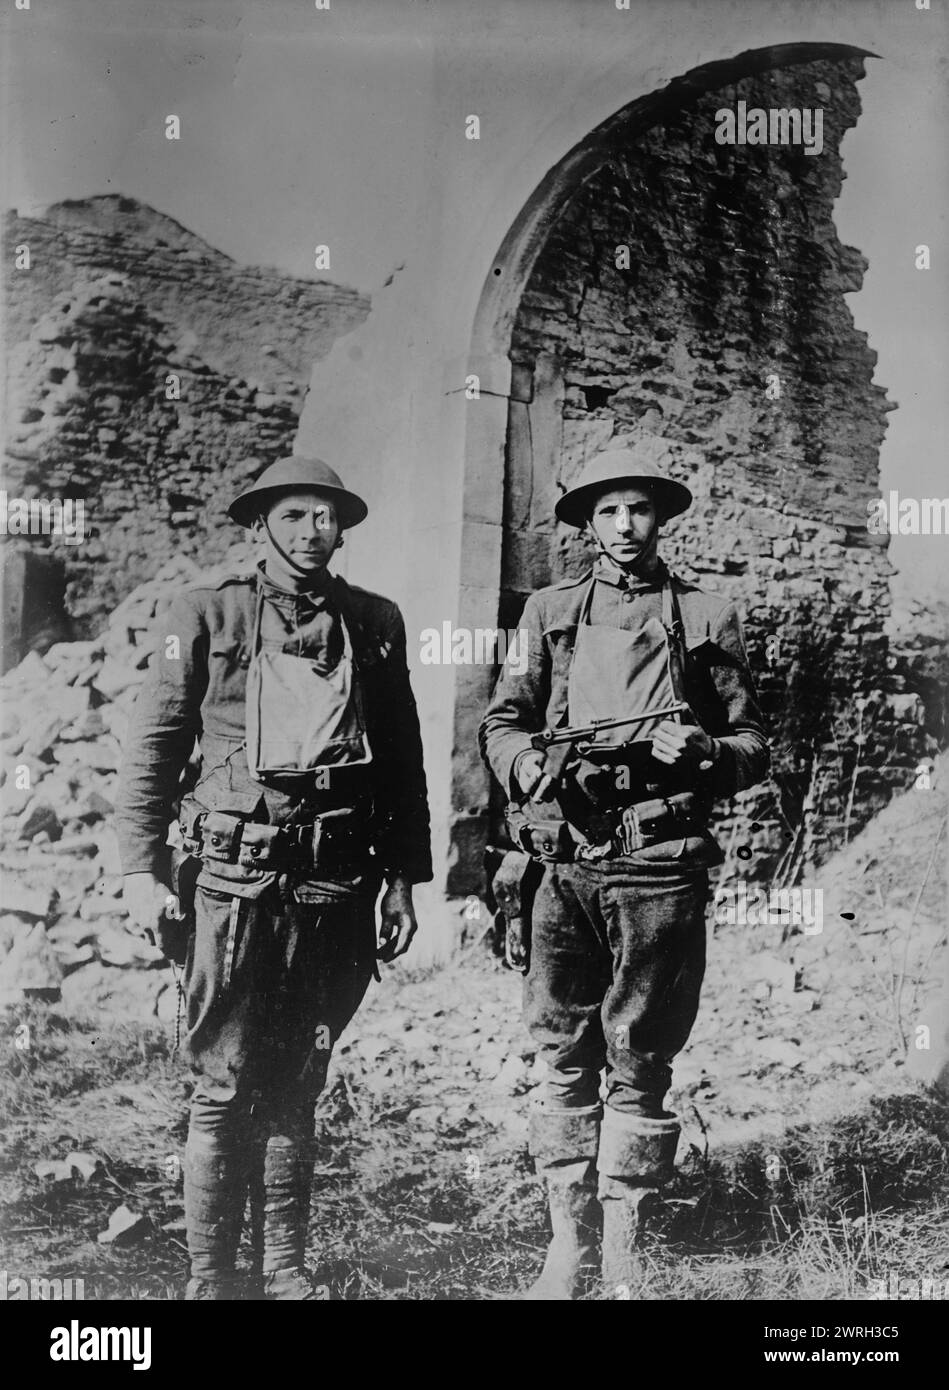 U.S. soldiers &amp; German pistol, 11 Mar 1918. Two American soldiers, Corporal Howard Thompson and James H. White who were part of a group that killed and captured several Germans in no man's land on March 7, 1918 during World War I. Thompson holds a pistol taken from a German soldier killed by White. Photograph was taken in Ancerviller, France, March 11, 1918. Stock Photo